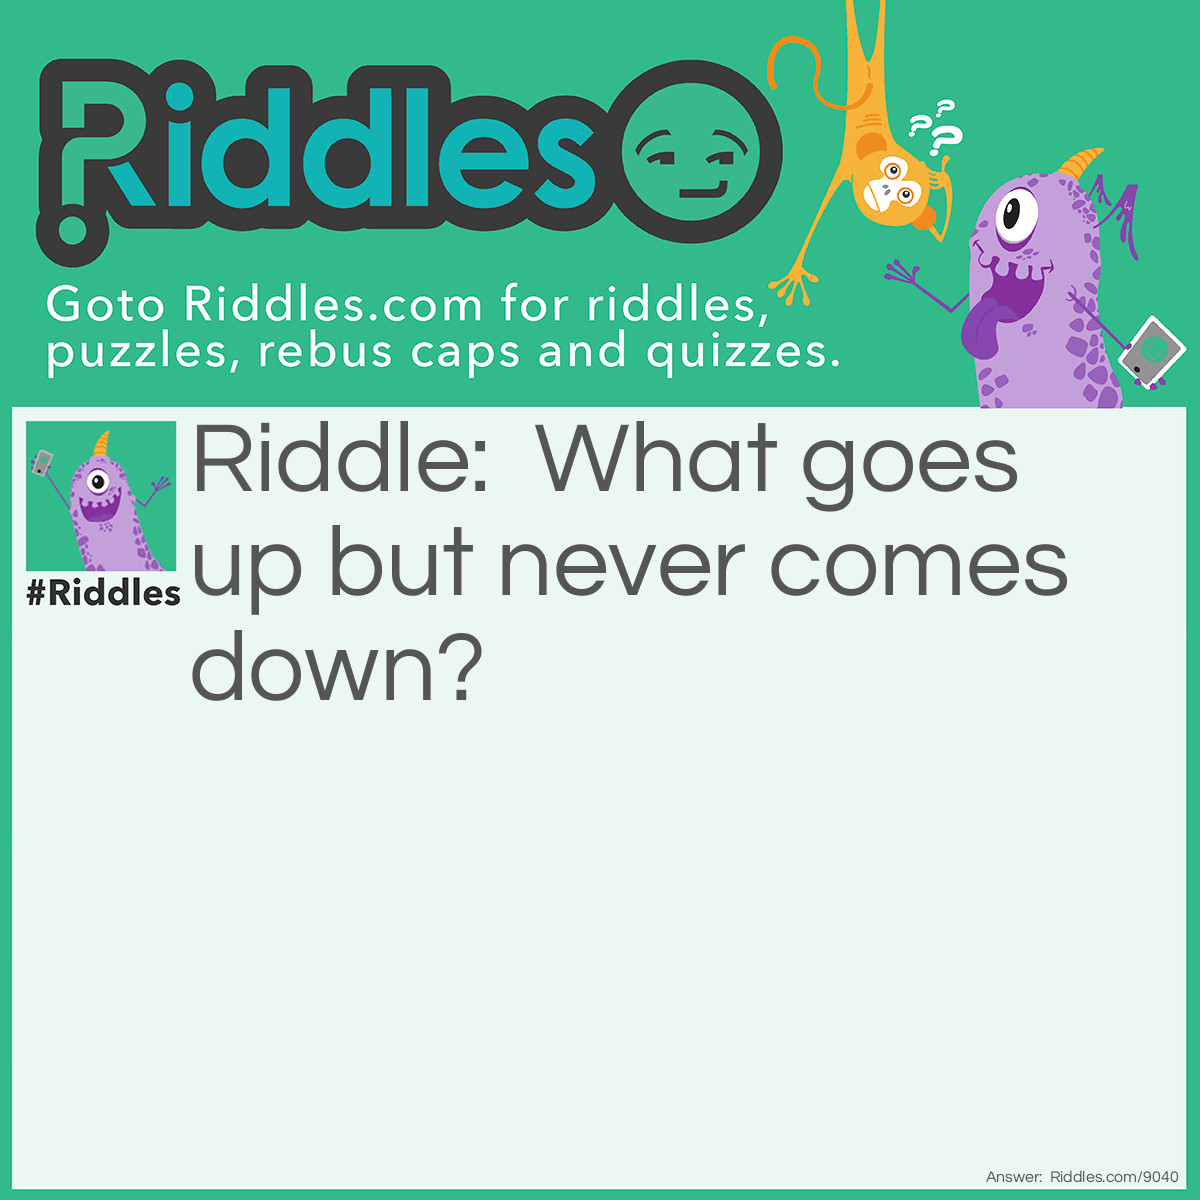 Riddle: What goes up but never comes down? Answer: Your age!